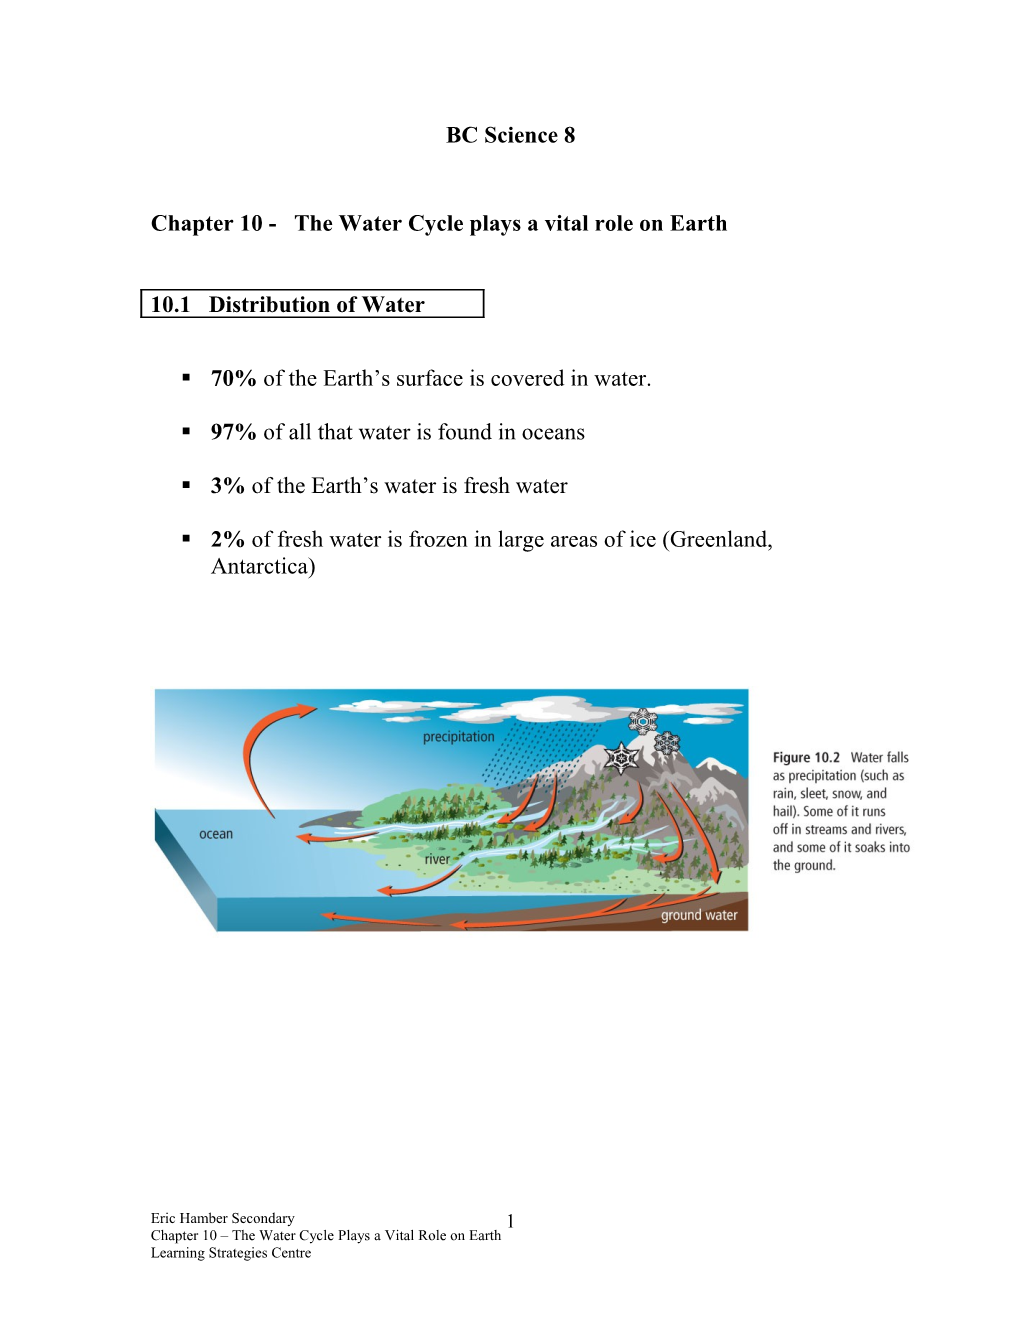 Chapter 10 - the Water Cycle Plays a Vital Role on Earth